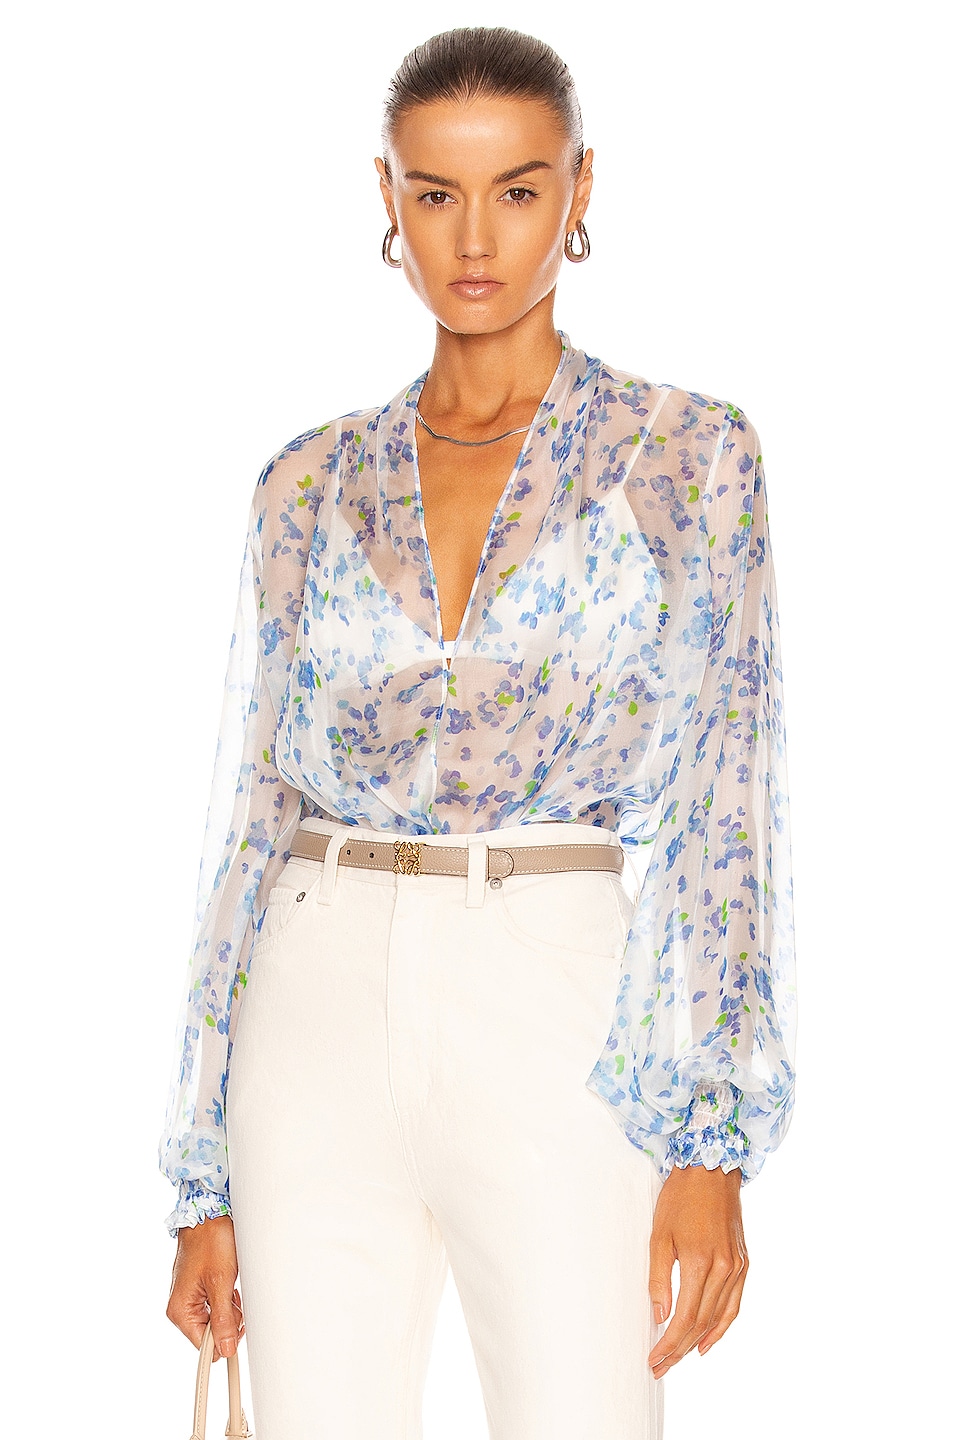 CAROLINE CONSTAS Bette Blouse in Blue Abstract Blossom | FWRD